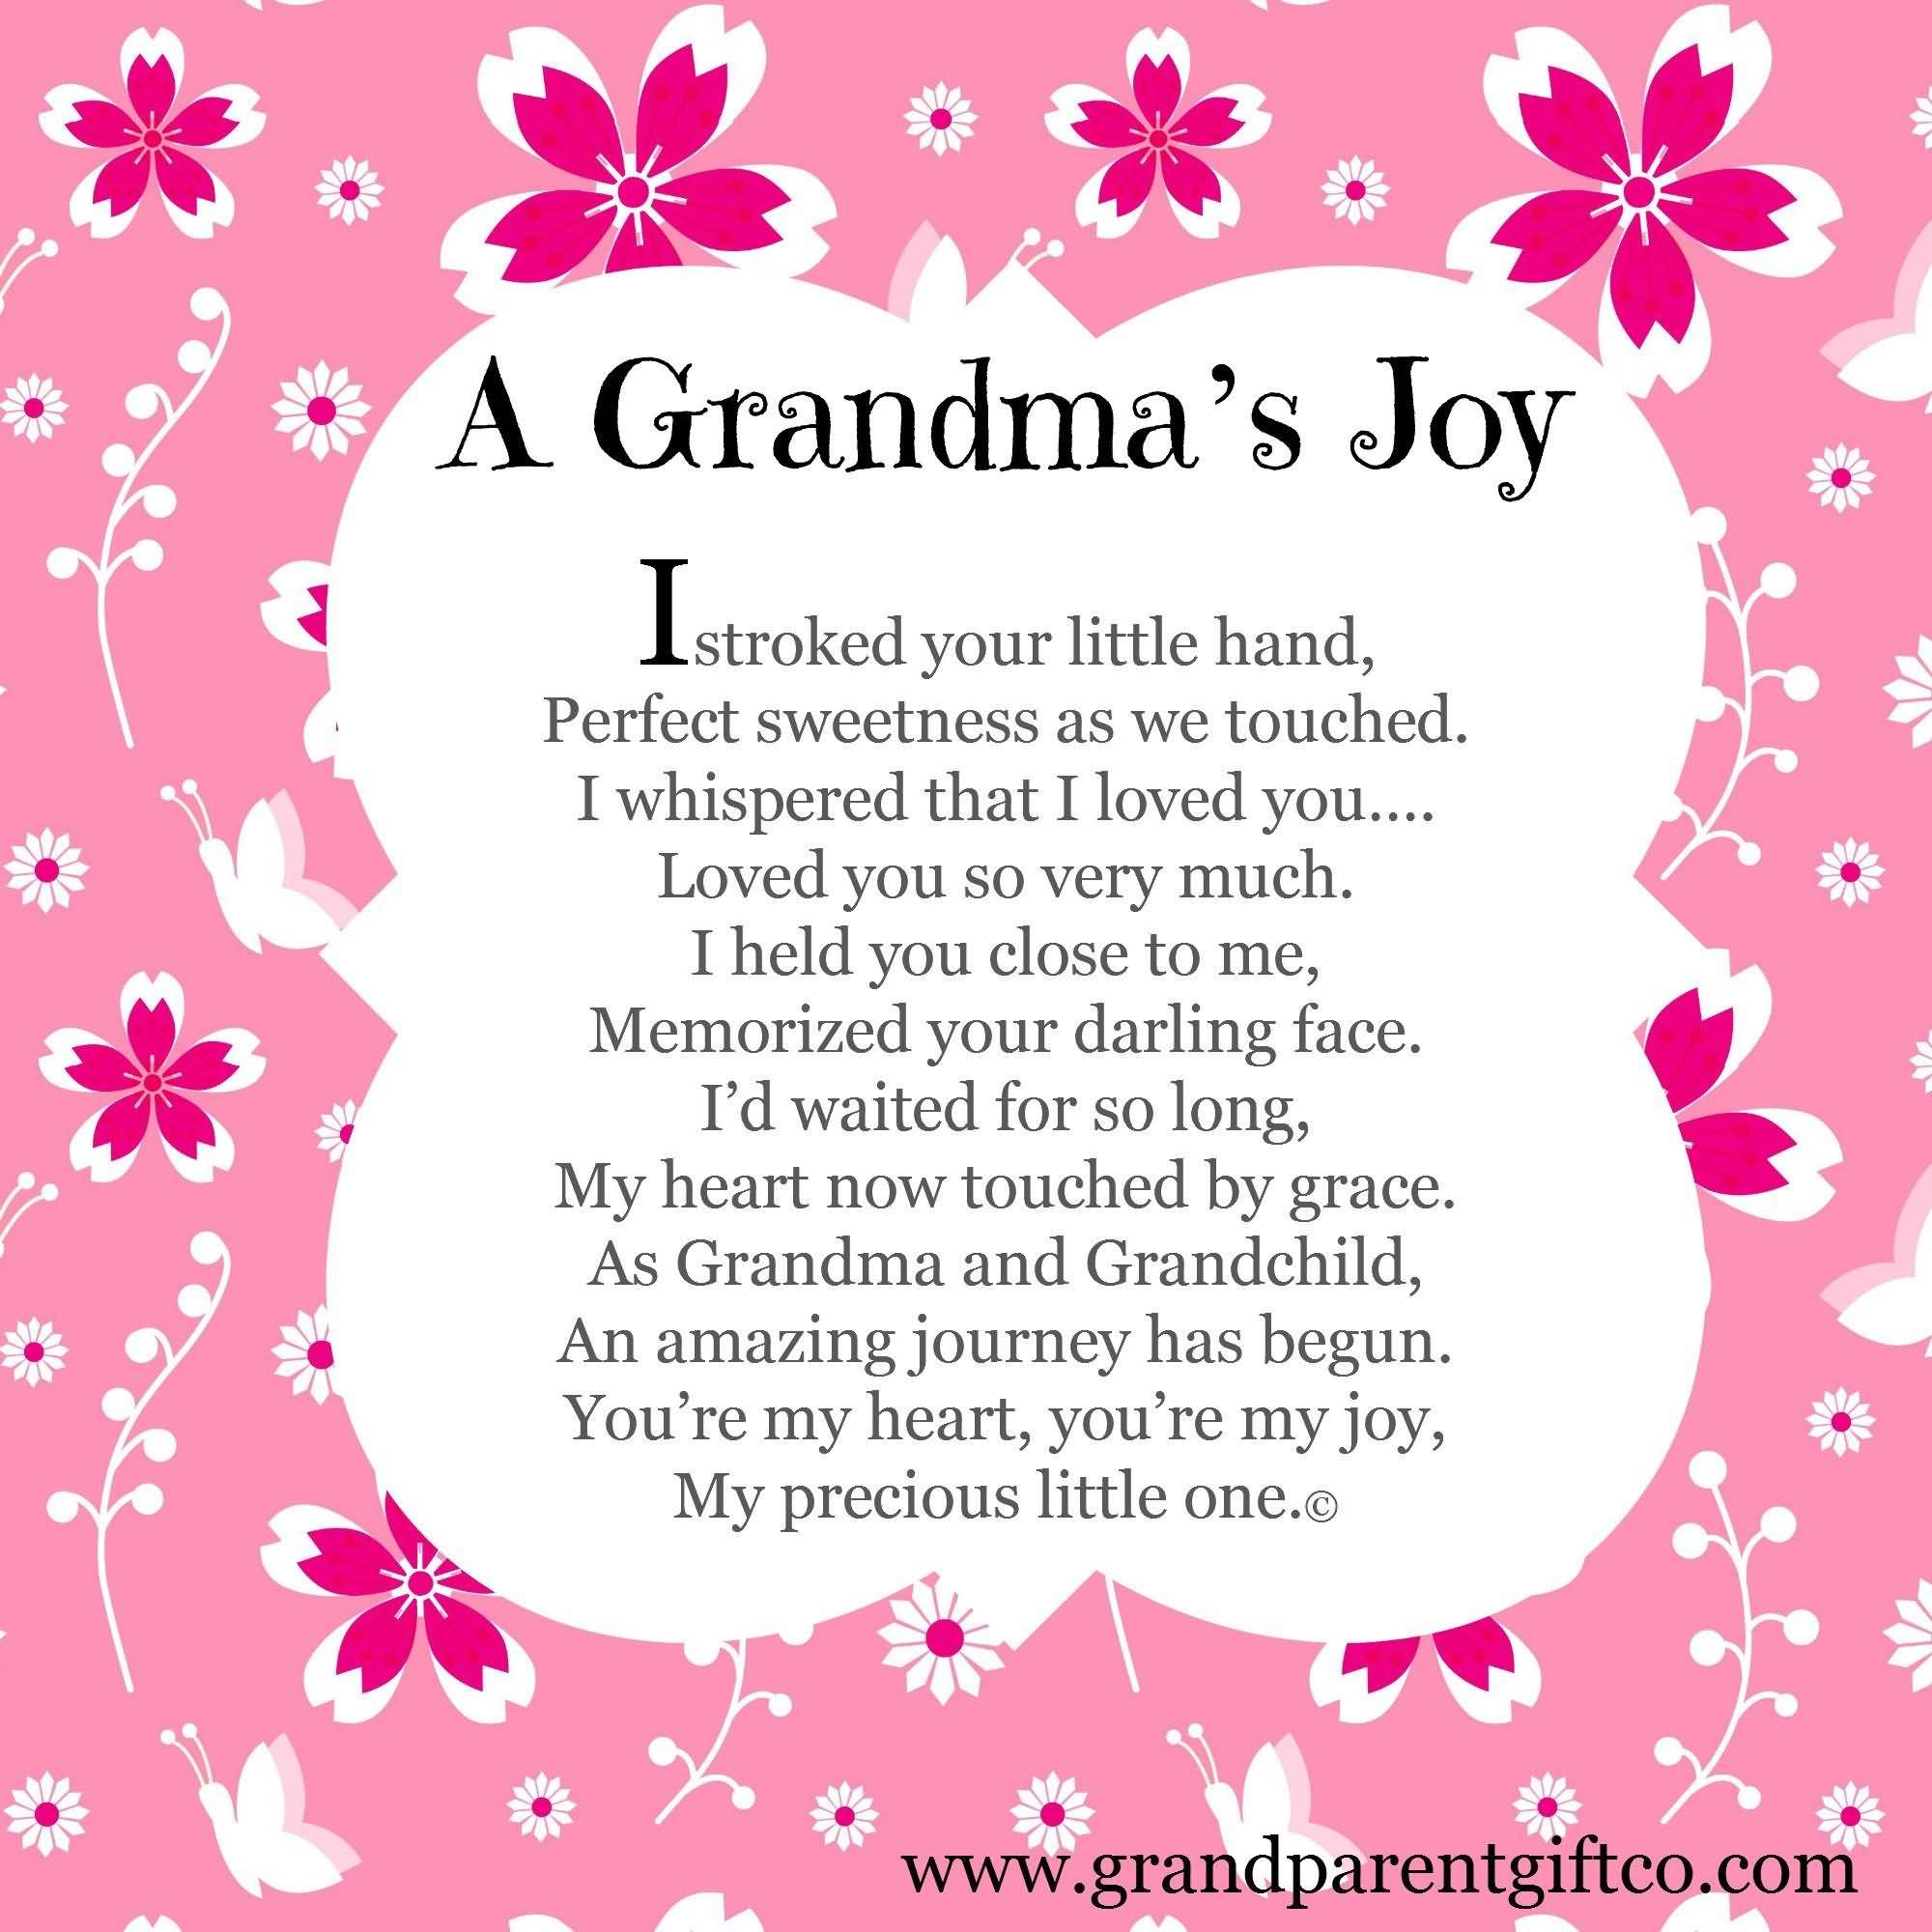 Best Grandma And Granddaughter Relationship Quotes in the world Check ...